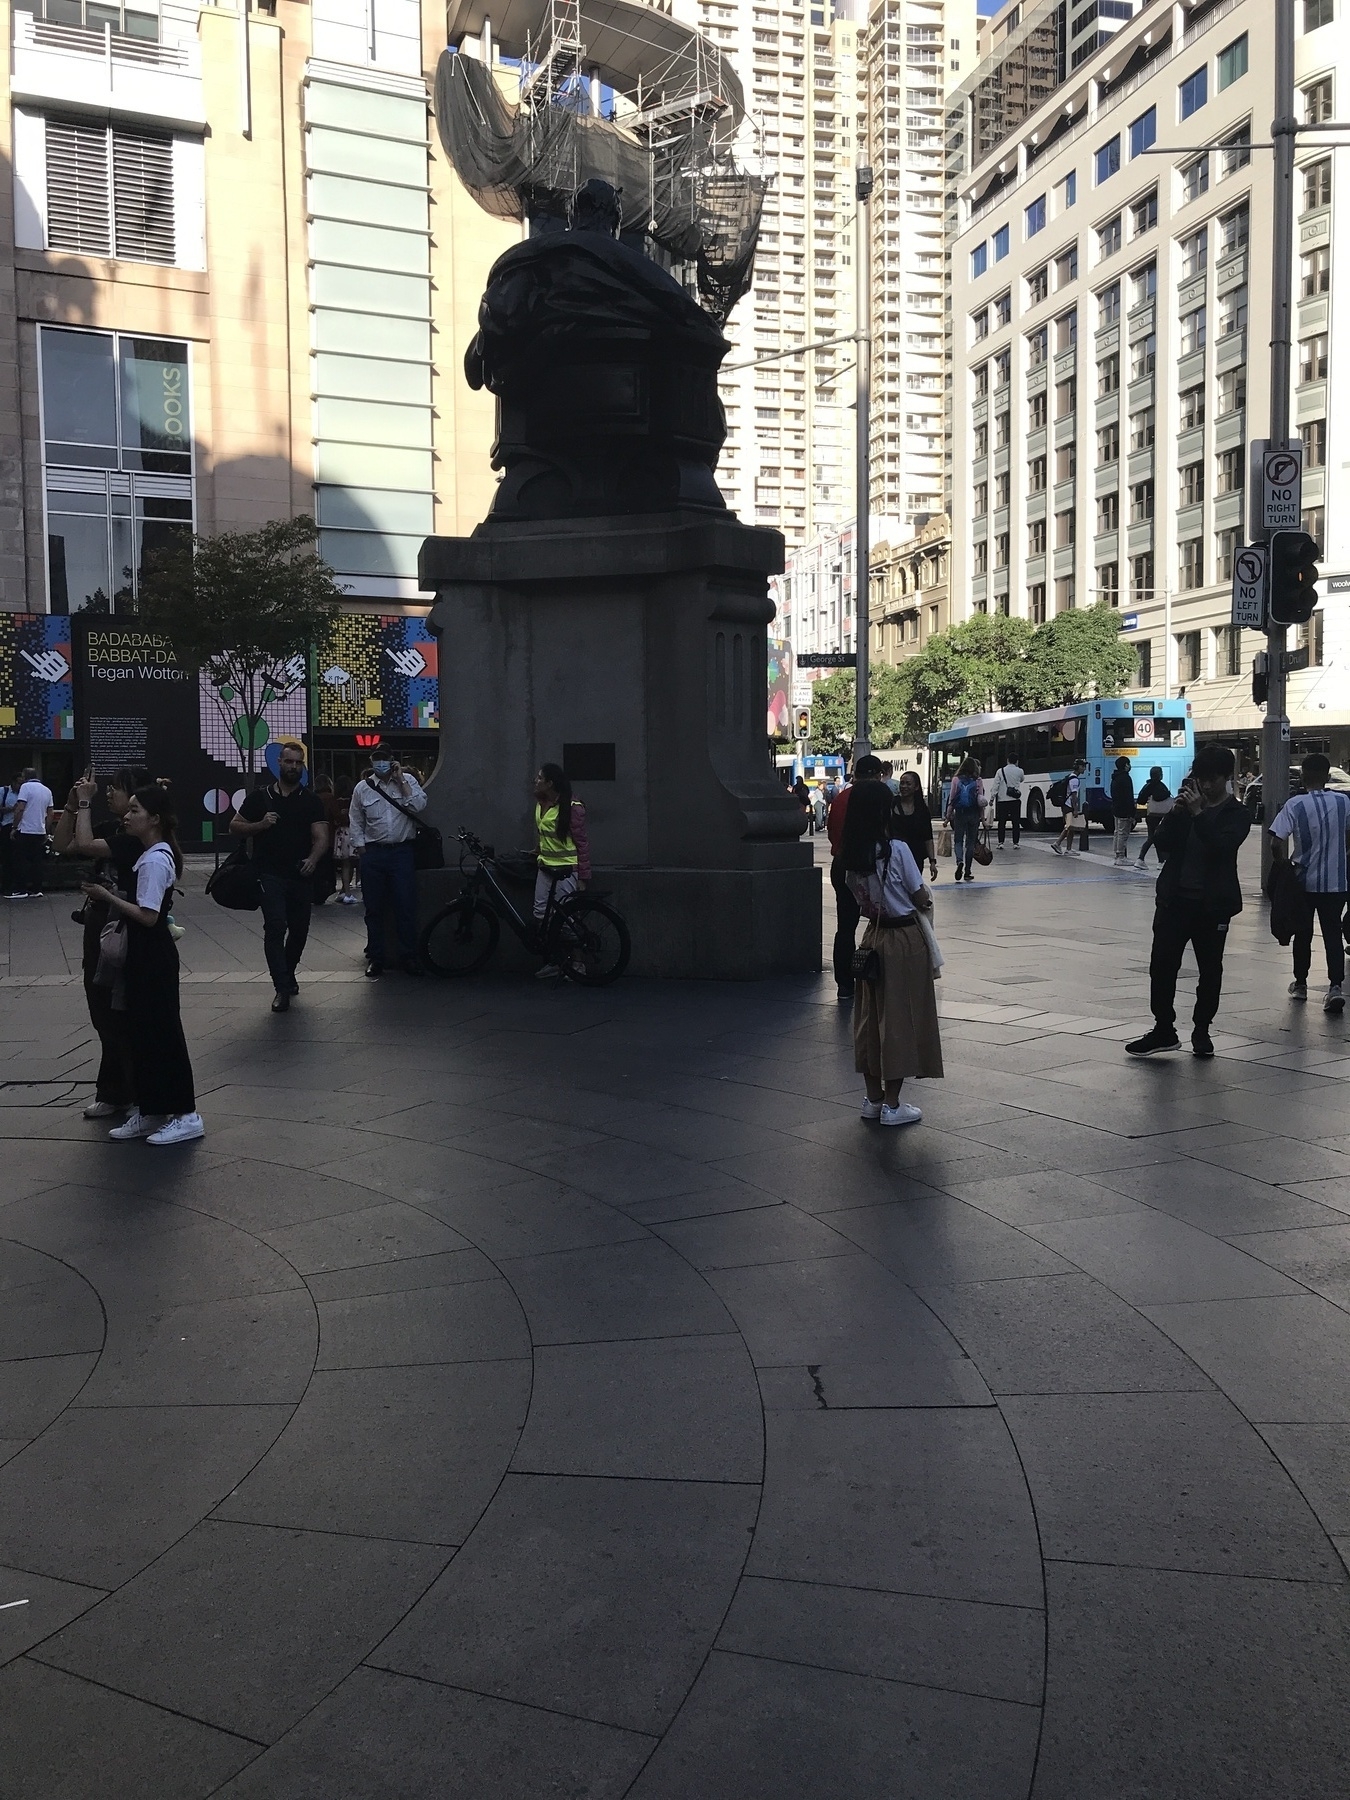 In the foreground is a shadowed open space with dark stone pavers laid in concentric circles. The space is dominated by a statue of Queen Victoria, seen from the back. The statue is in deep shade and stands in silhouette against a backdrop of tall buildings lit brightly by the late afternoon sun. The statue’s plinth is the height of two people, and a young woman in a bright yellow vest leans against it with her pushbike. She has long dark hair, long red sleeves and grey trousers, and is looking off to the side as if she’s seen someone she knows. A girl stands nearby being photographed, and various tourists, workers and window-shoppers populate the square and the street beyond. The statue on the plinth is a throne, with the back of the queen’s head visible above it. In the middle ground, a sunlit building supports a structure of scaffolding draped with huge loops of grey mesh like gathered curtains. It merges with the statue and almost seems to be part of it, or perhaps a ship that hangs in the air.